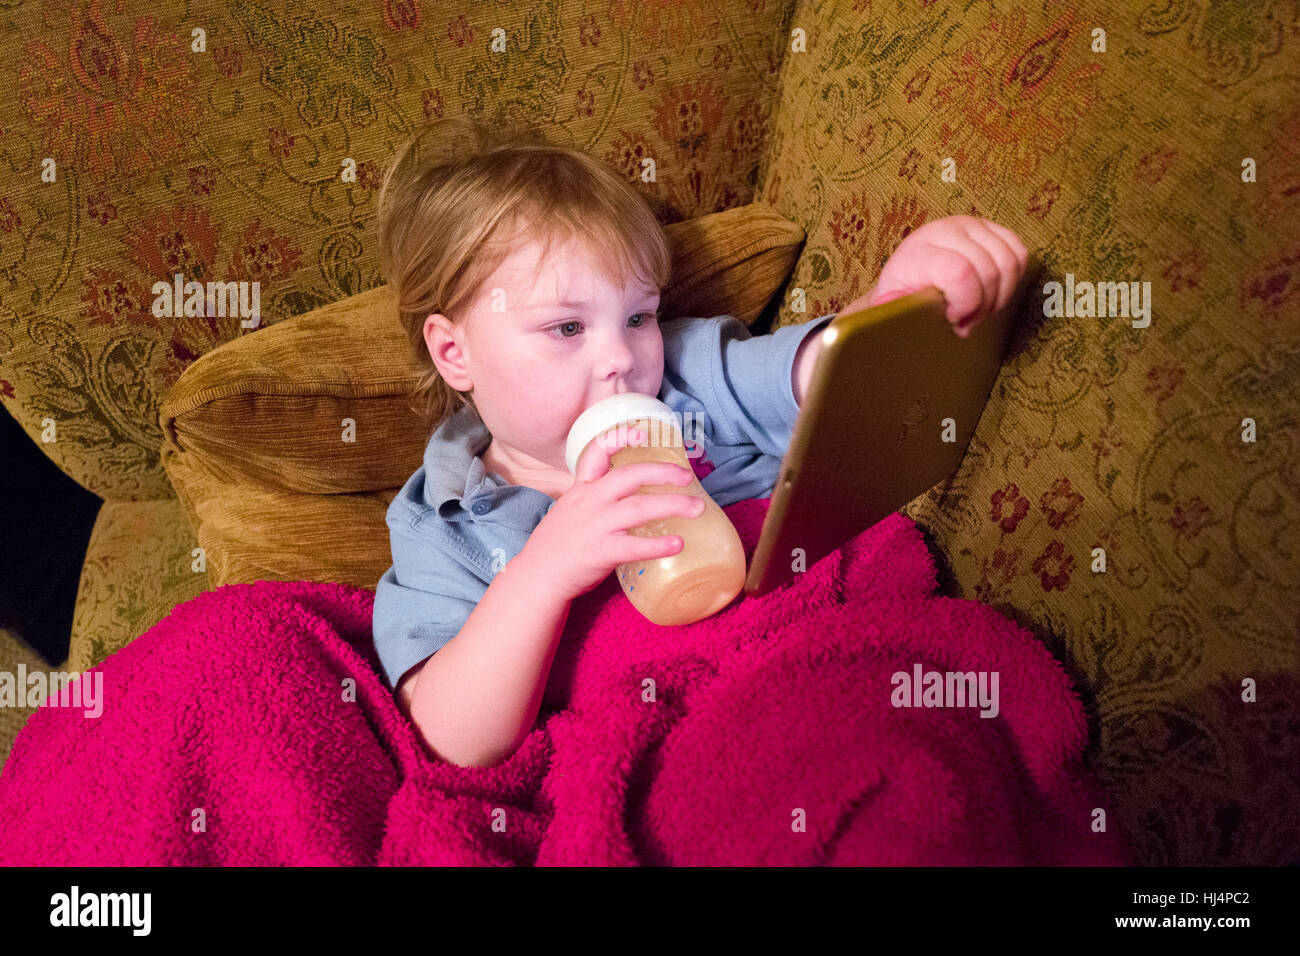 https://c8.alamy.com/comp/HJ4PC2/a-two-year-old-toddler-drinking-a-bottle-of-baby-milk-while-sitting-HJ4PC2.jpg